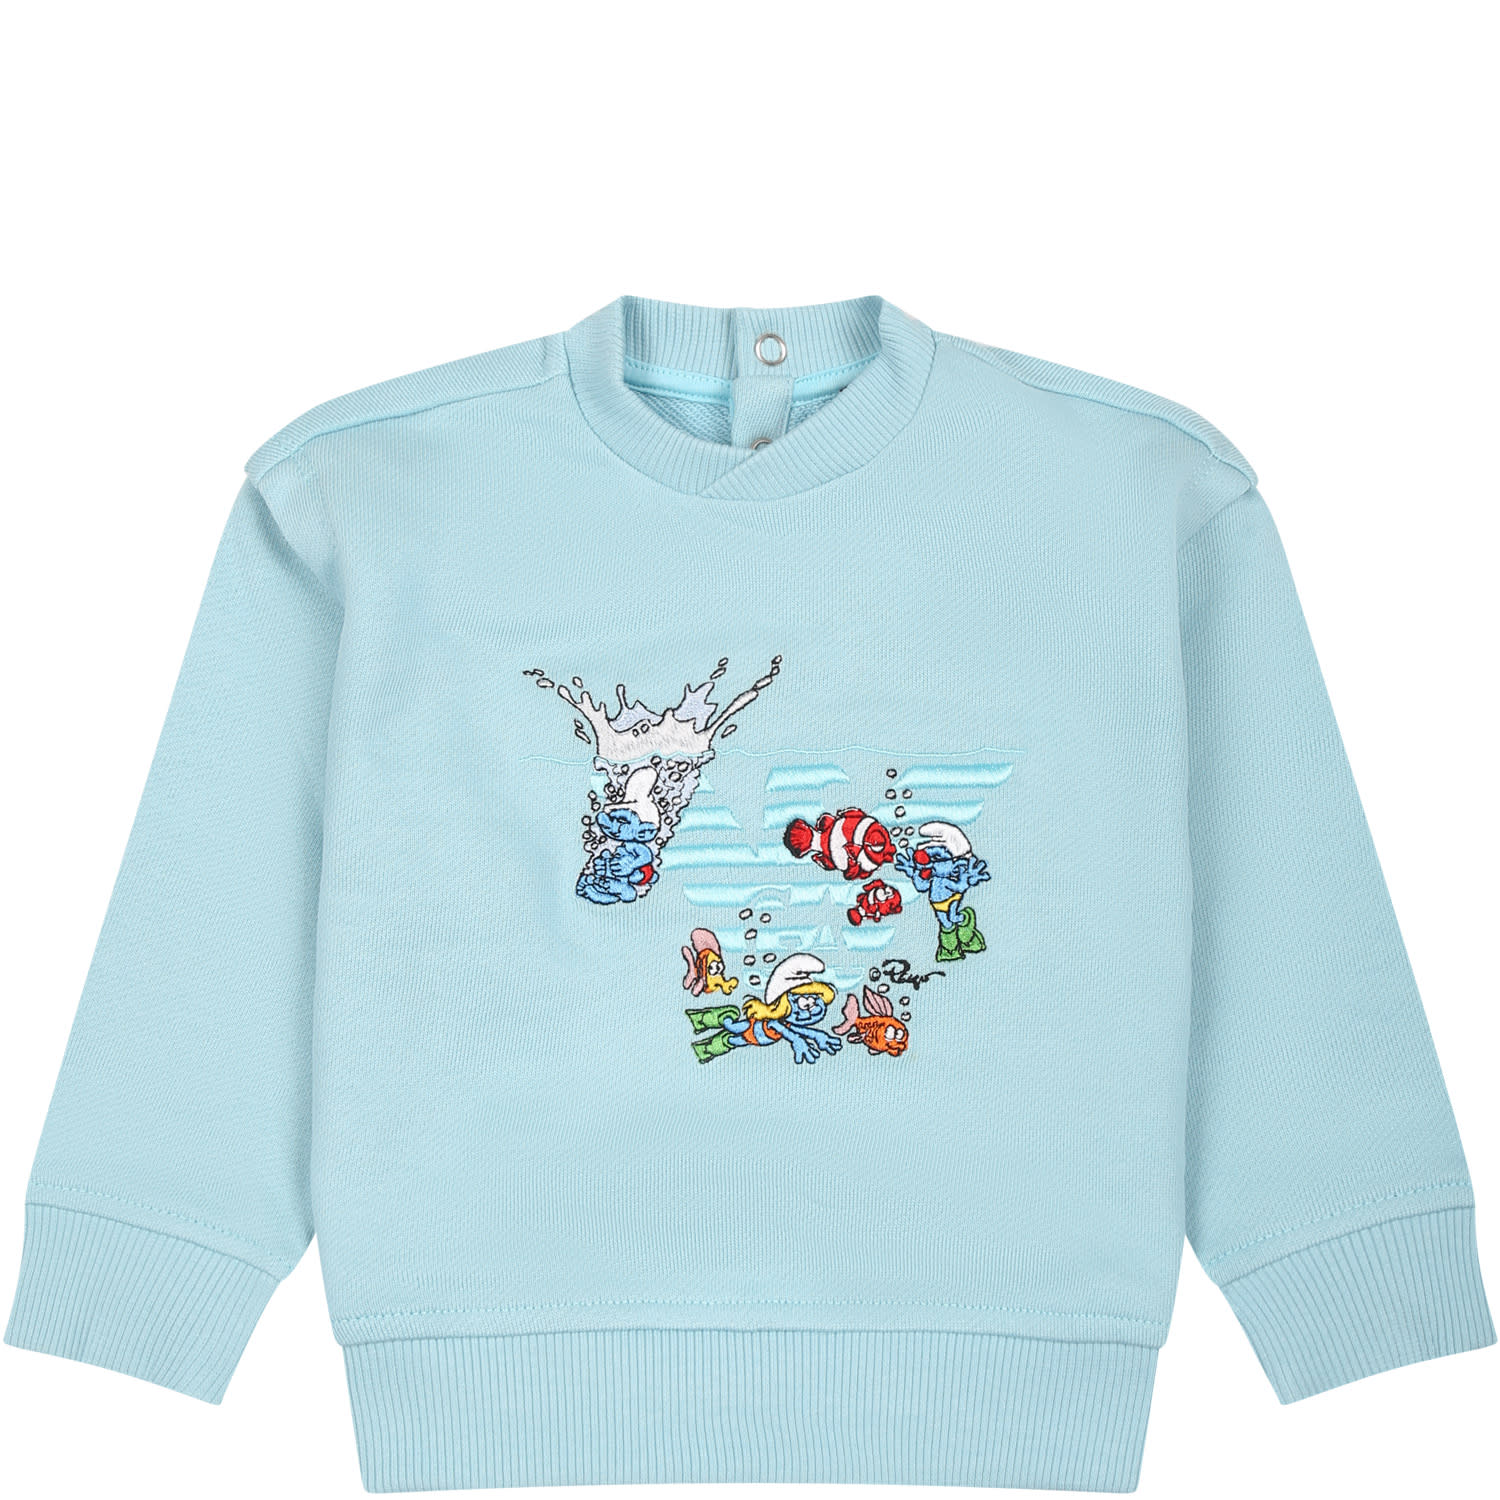 Shop Armani Collezioni Light Blue Sweatshirt For Baby Boy With The Smurfs